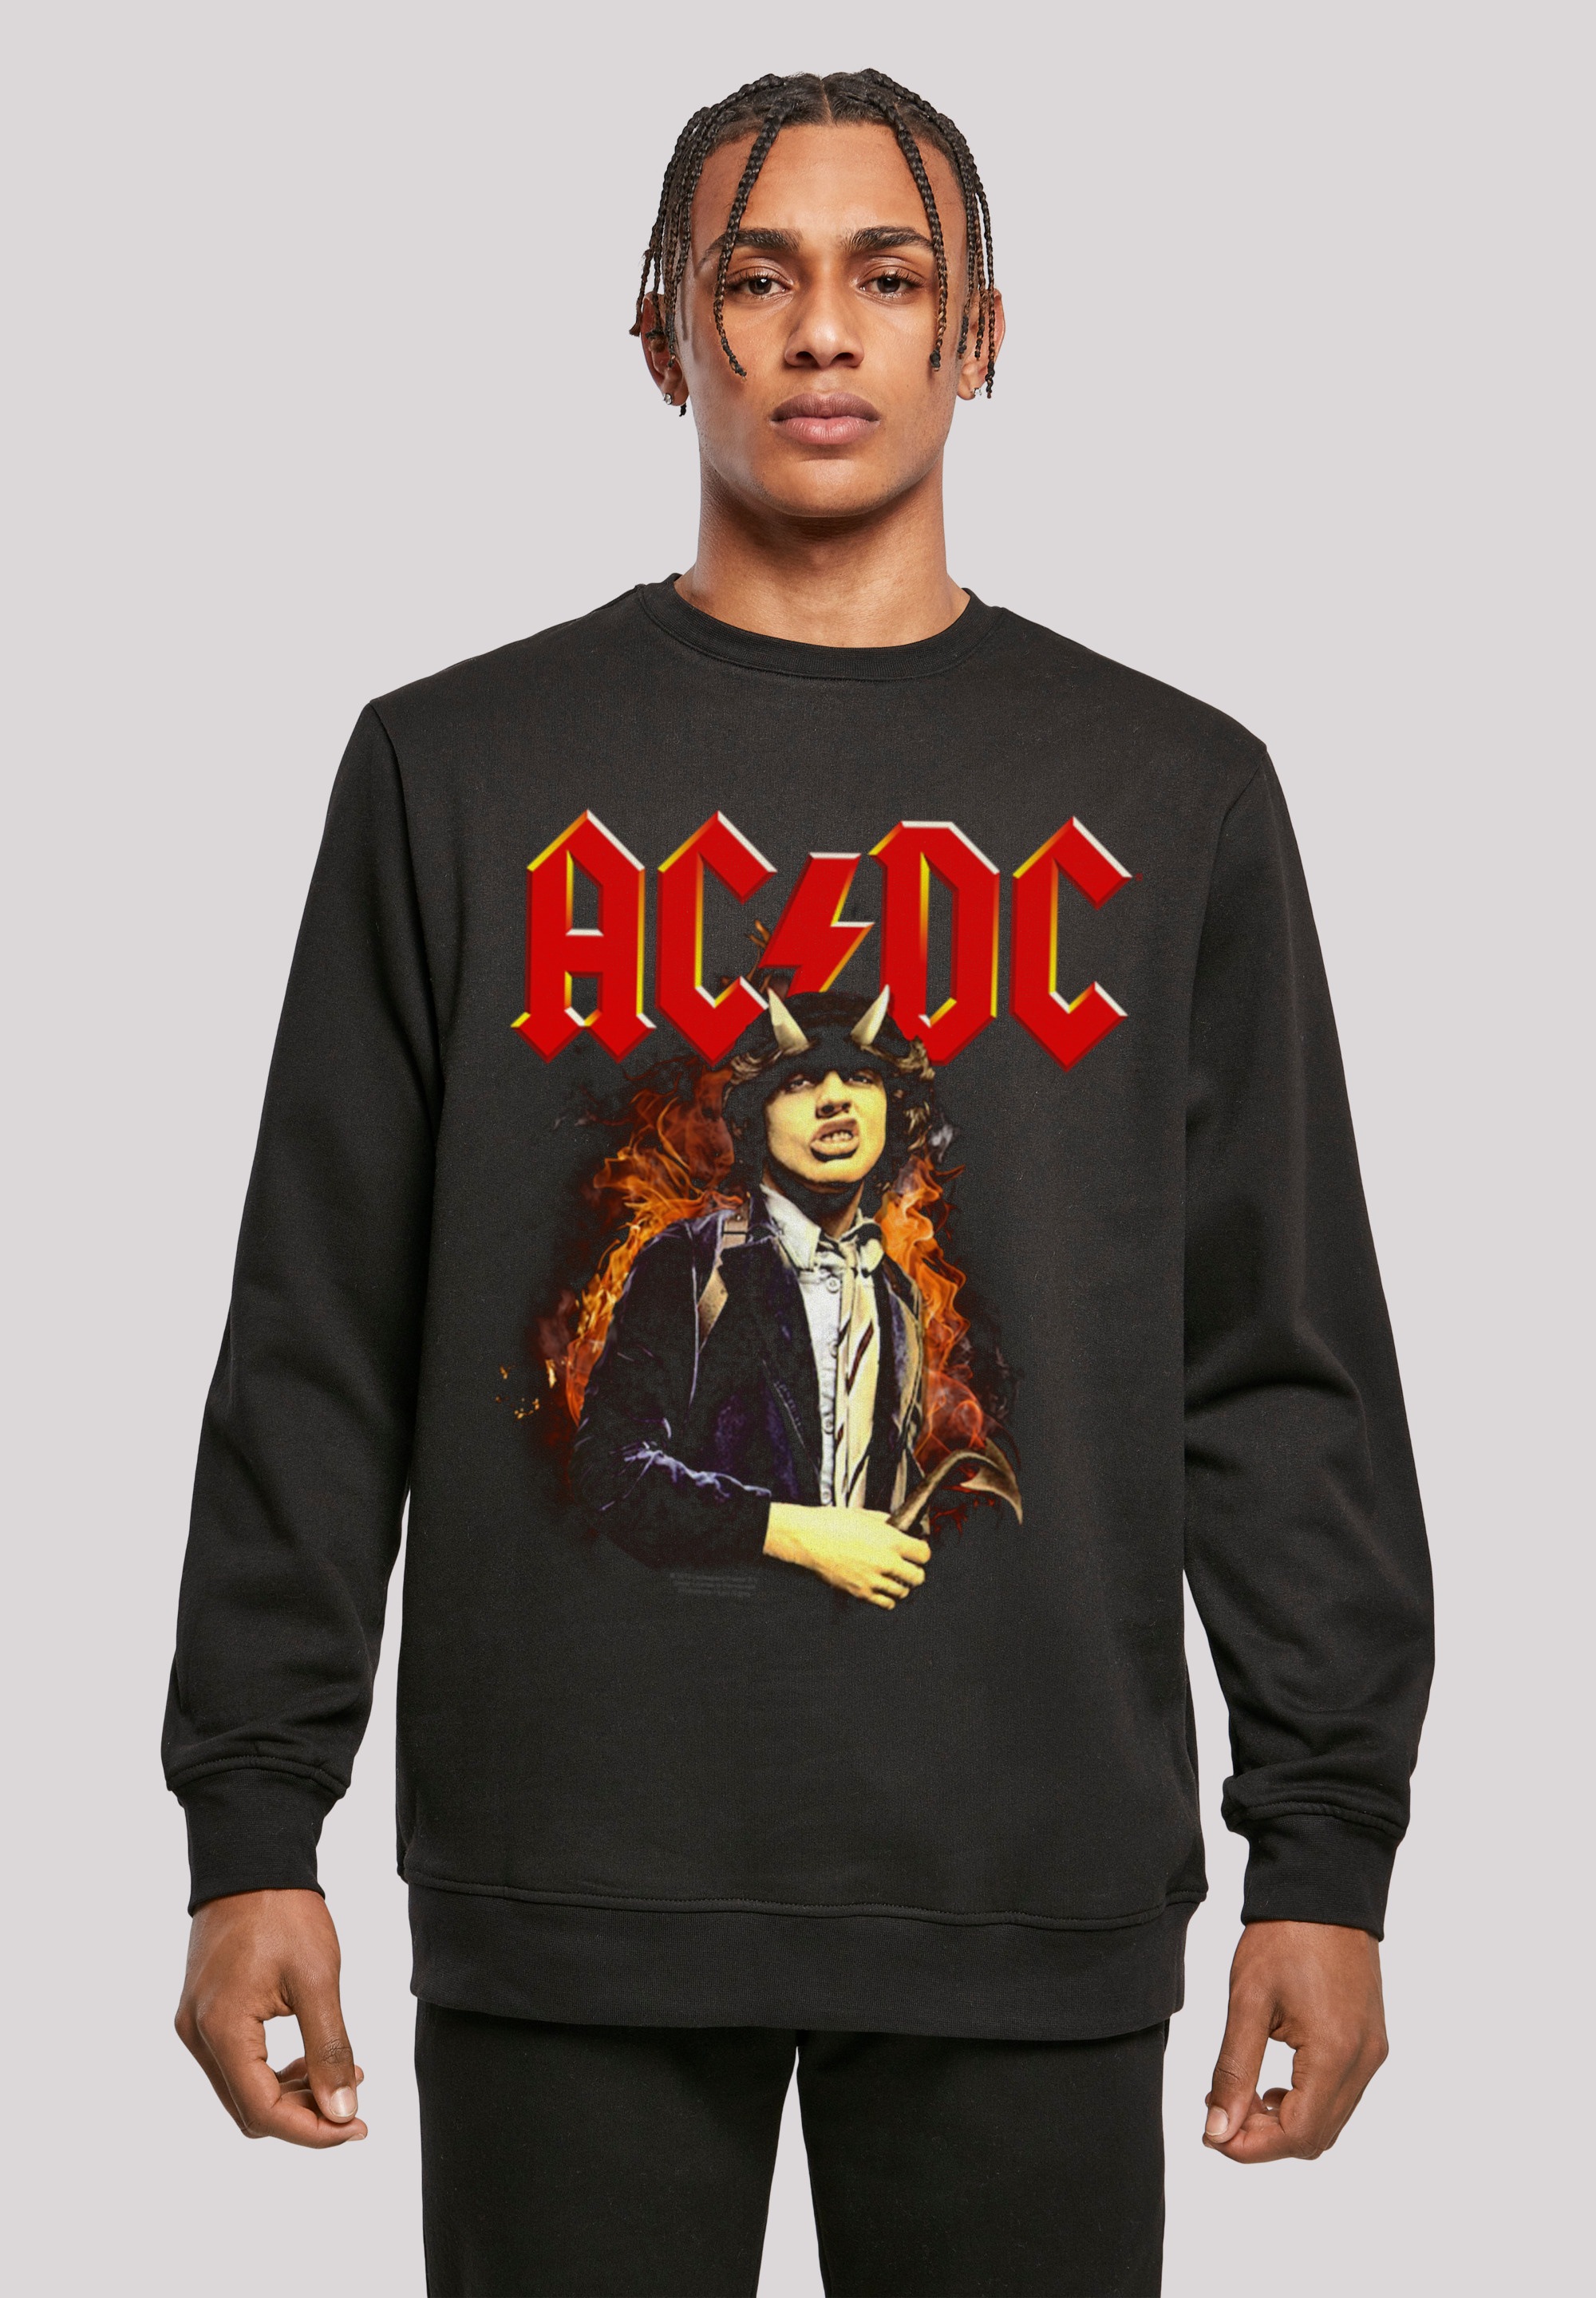 F4NT4STIC Sweatshirt »ACDC Rock Musik Band Angus Highway To Hell«, Print